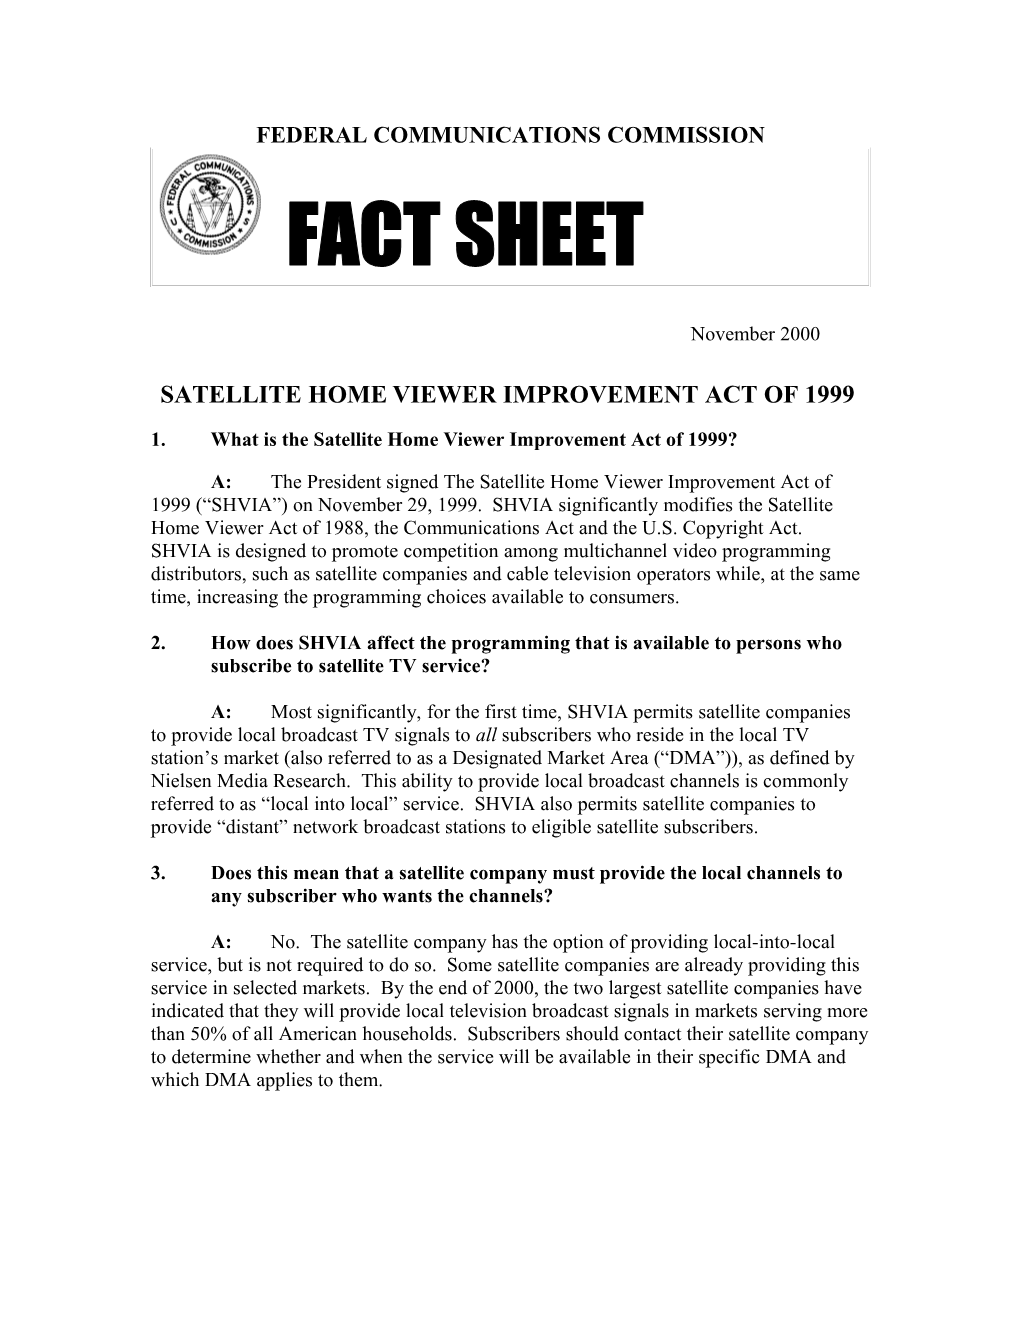 Satellite Homeviewer Improvement Act of 1999